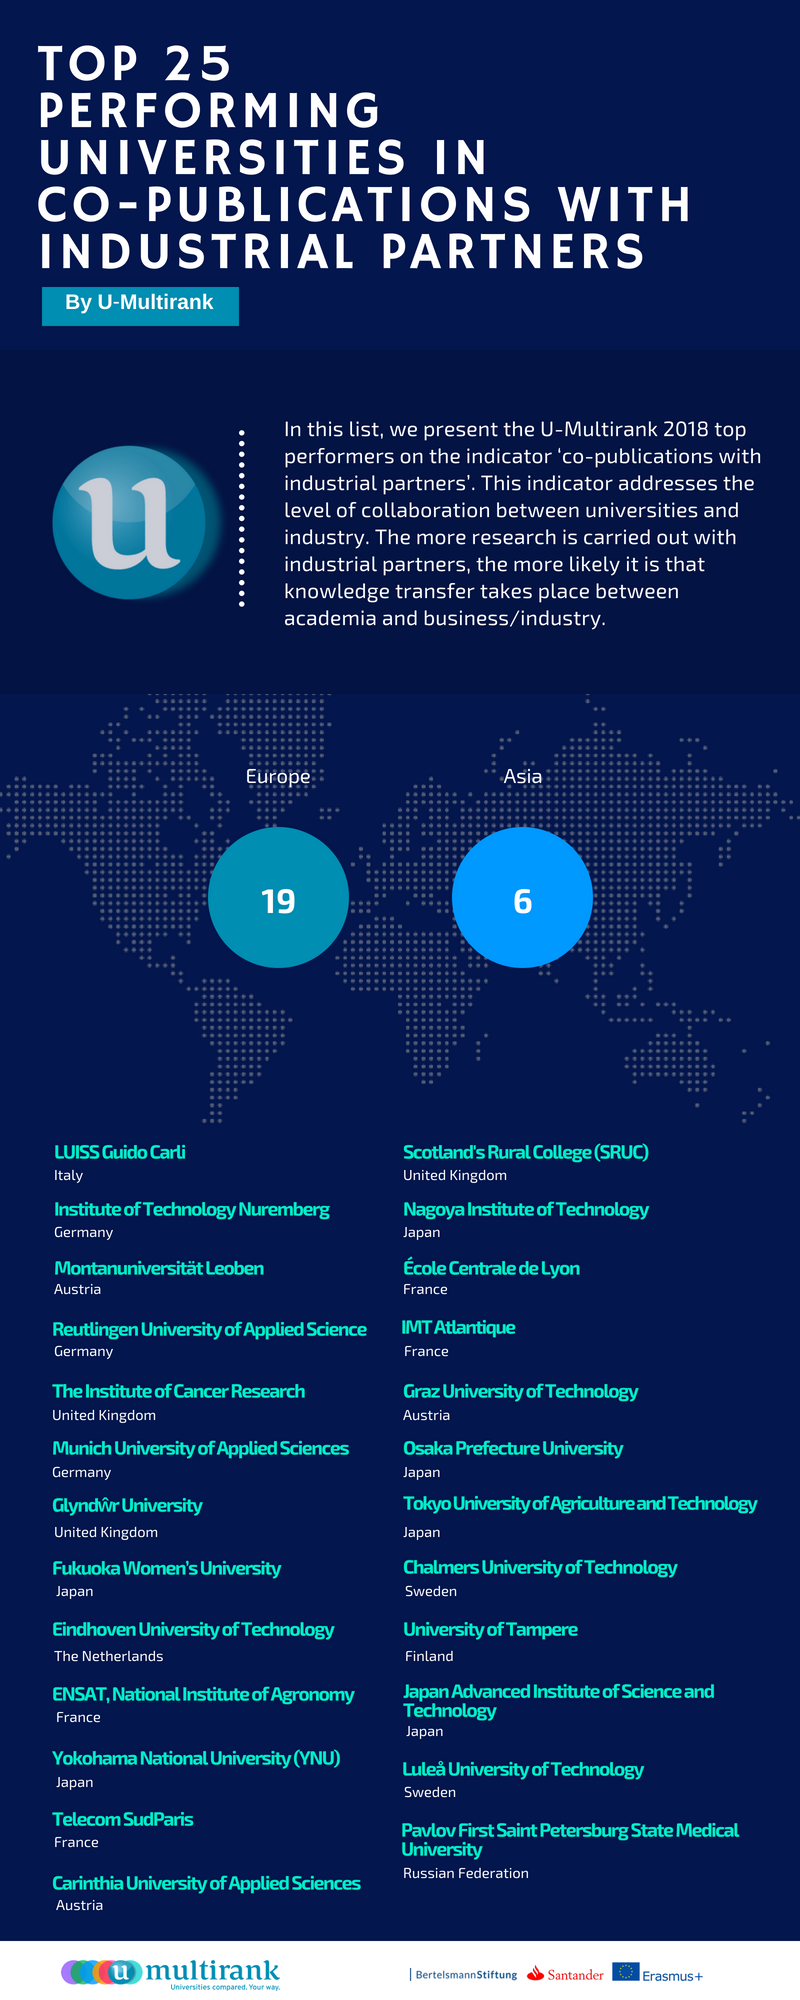 Top 25 universities in co-publications with industrial partners